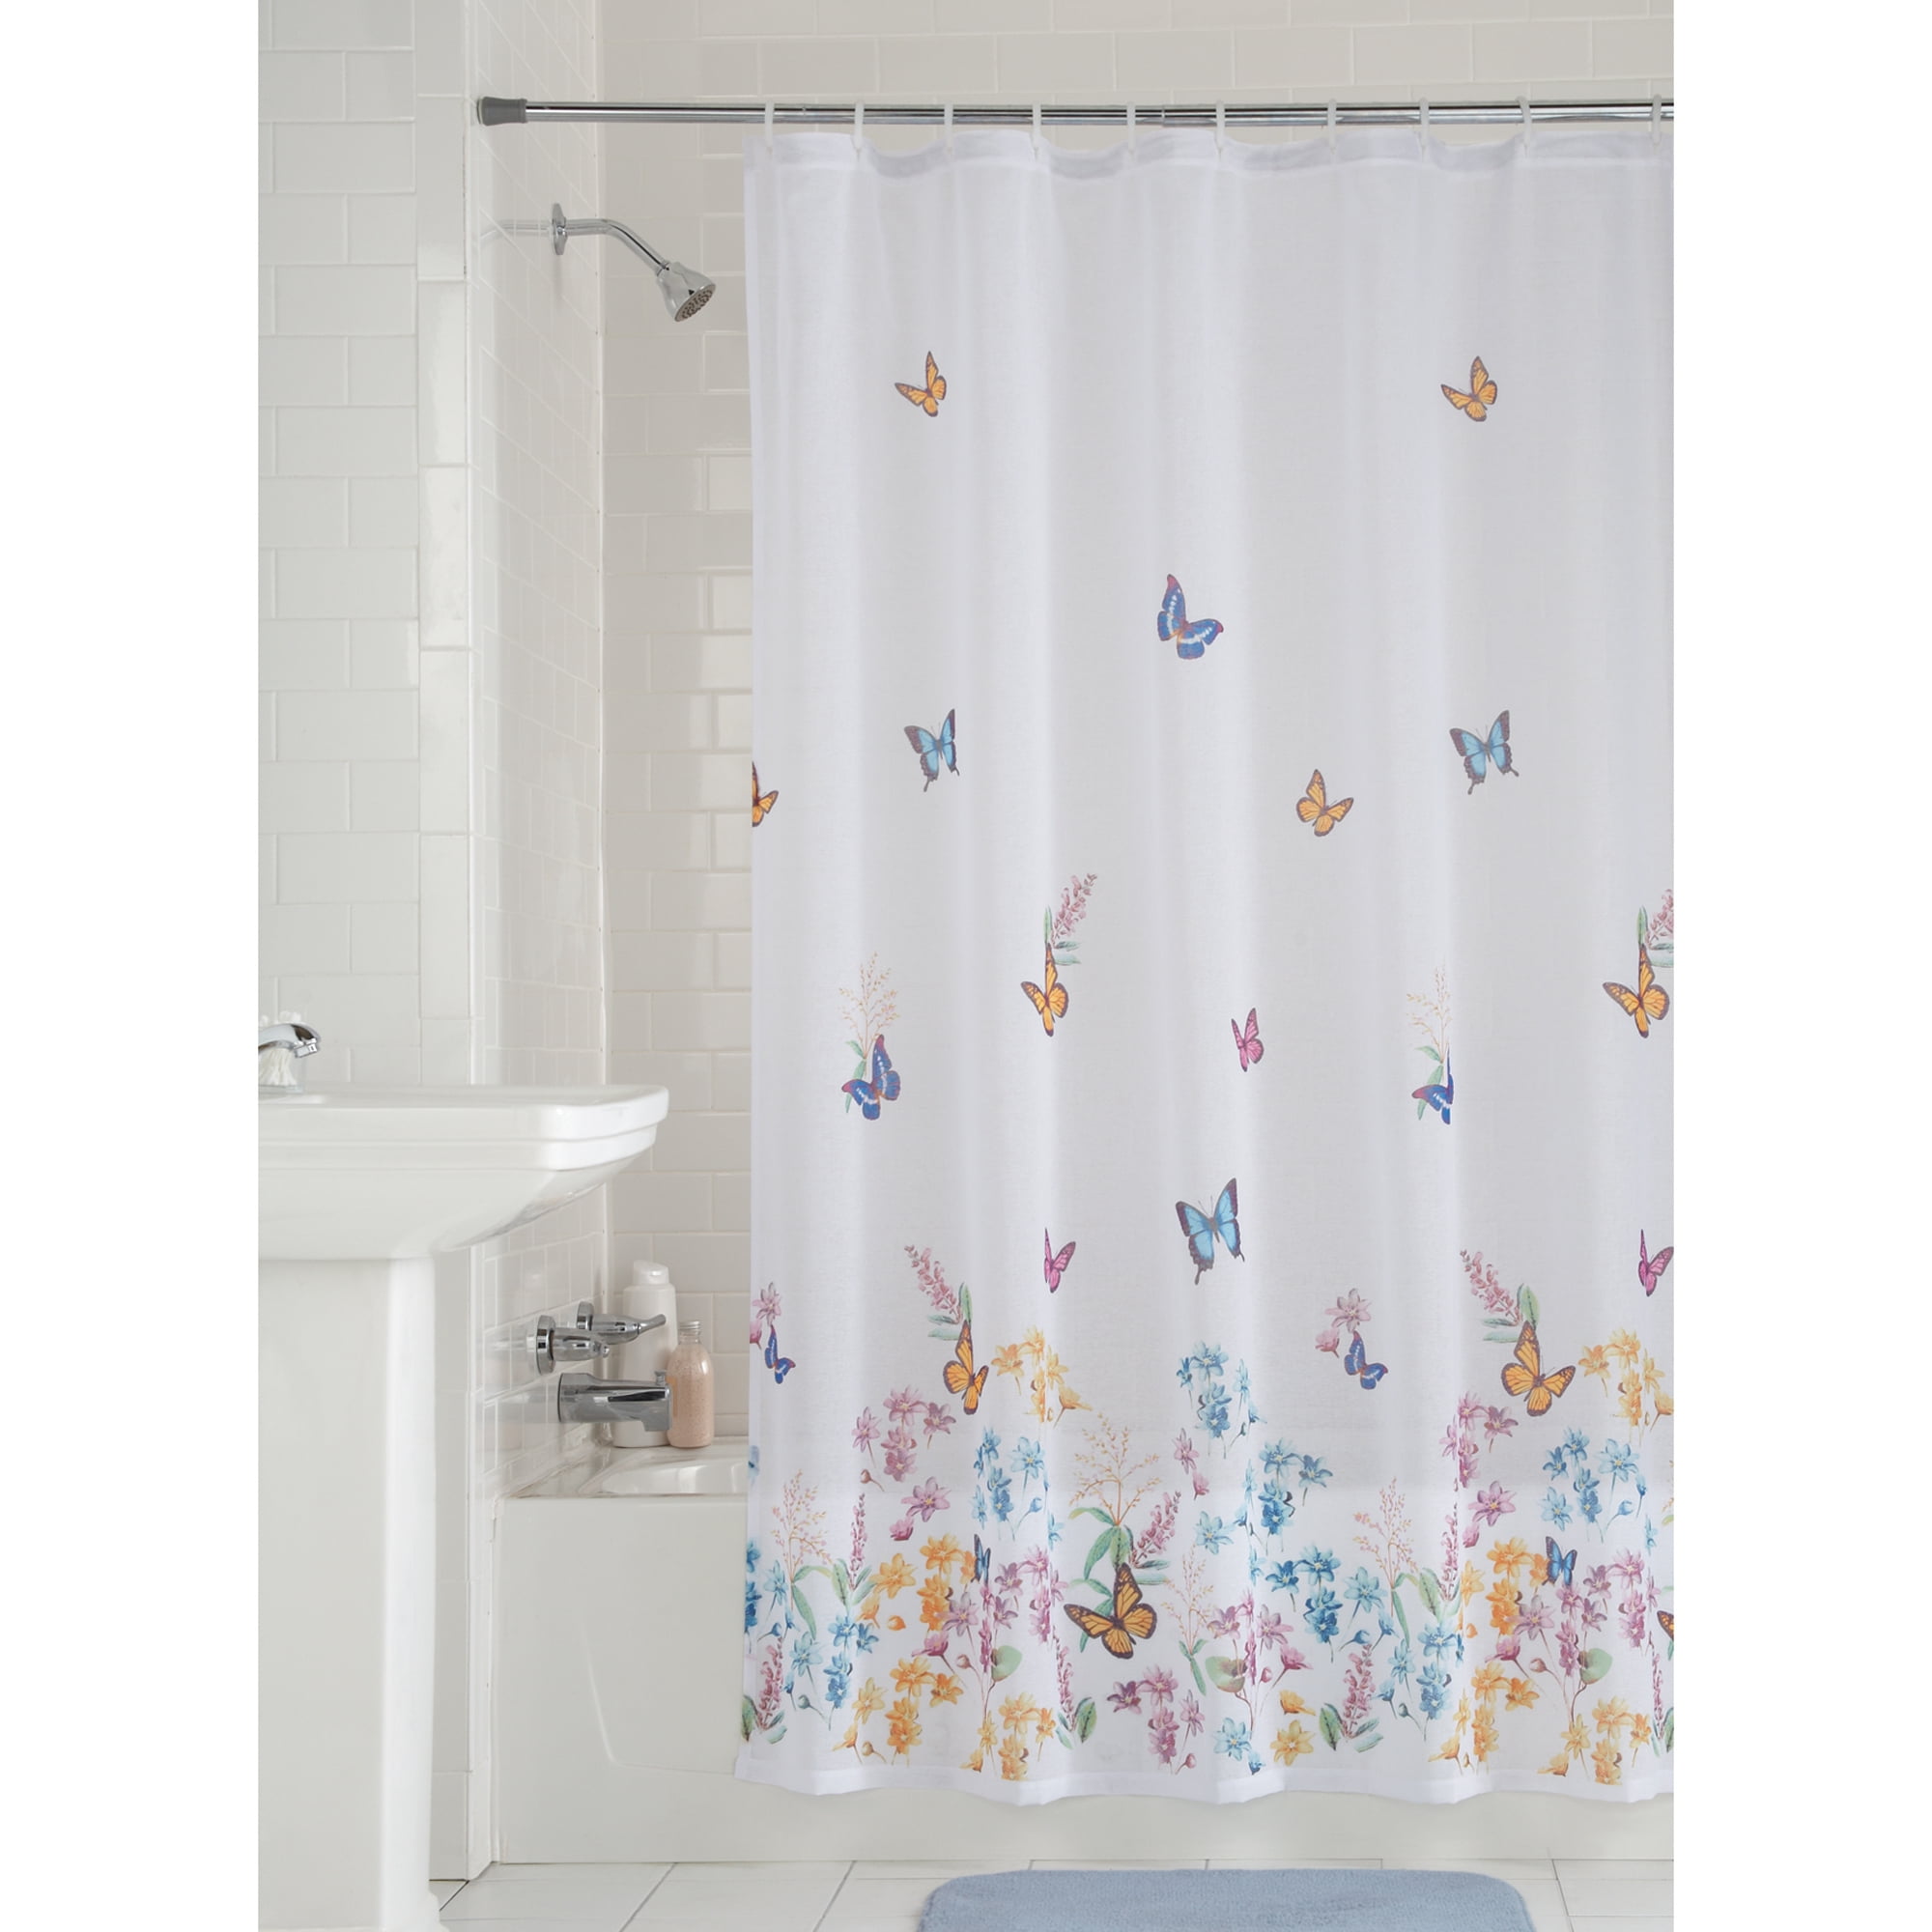 Multicolor Fabric Shower Curtain 70 X, See Through Fabric Shower Curtain